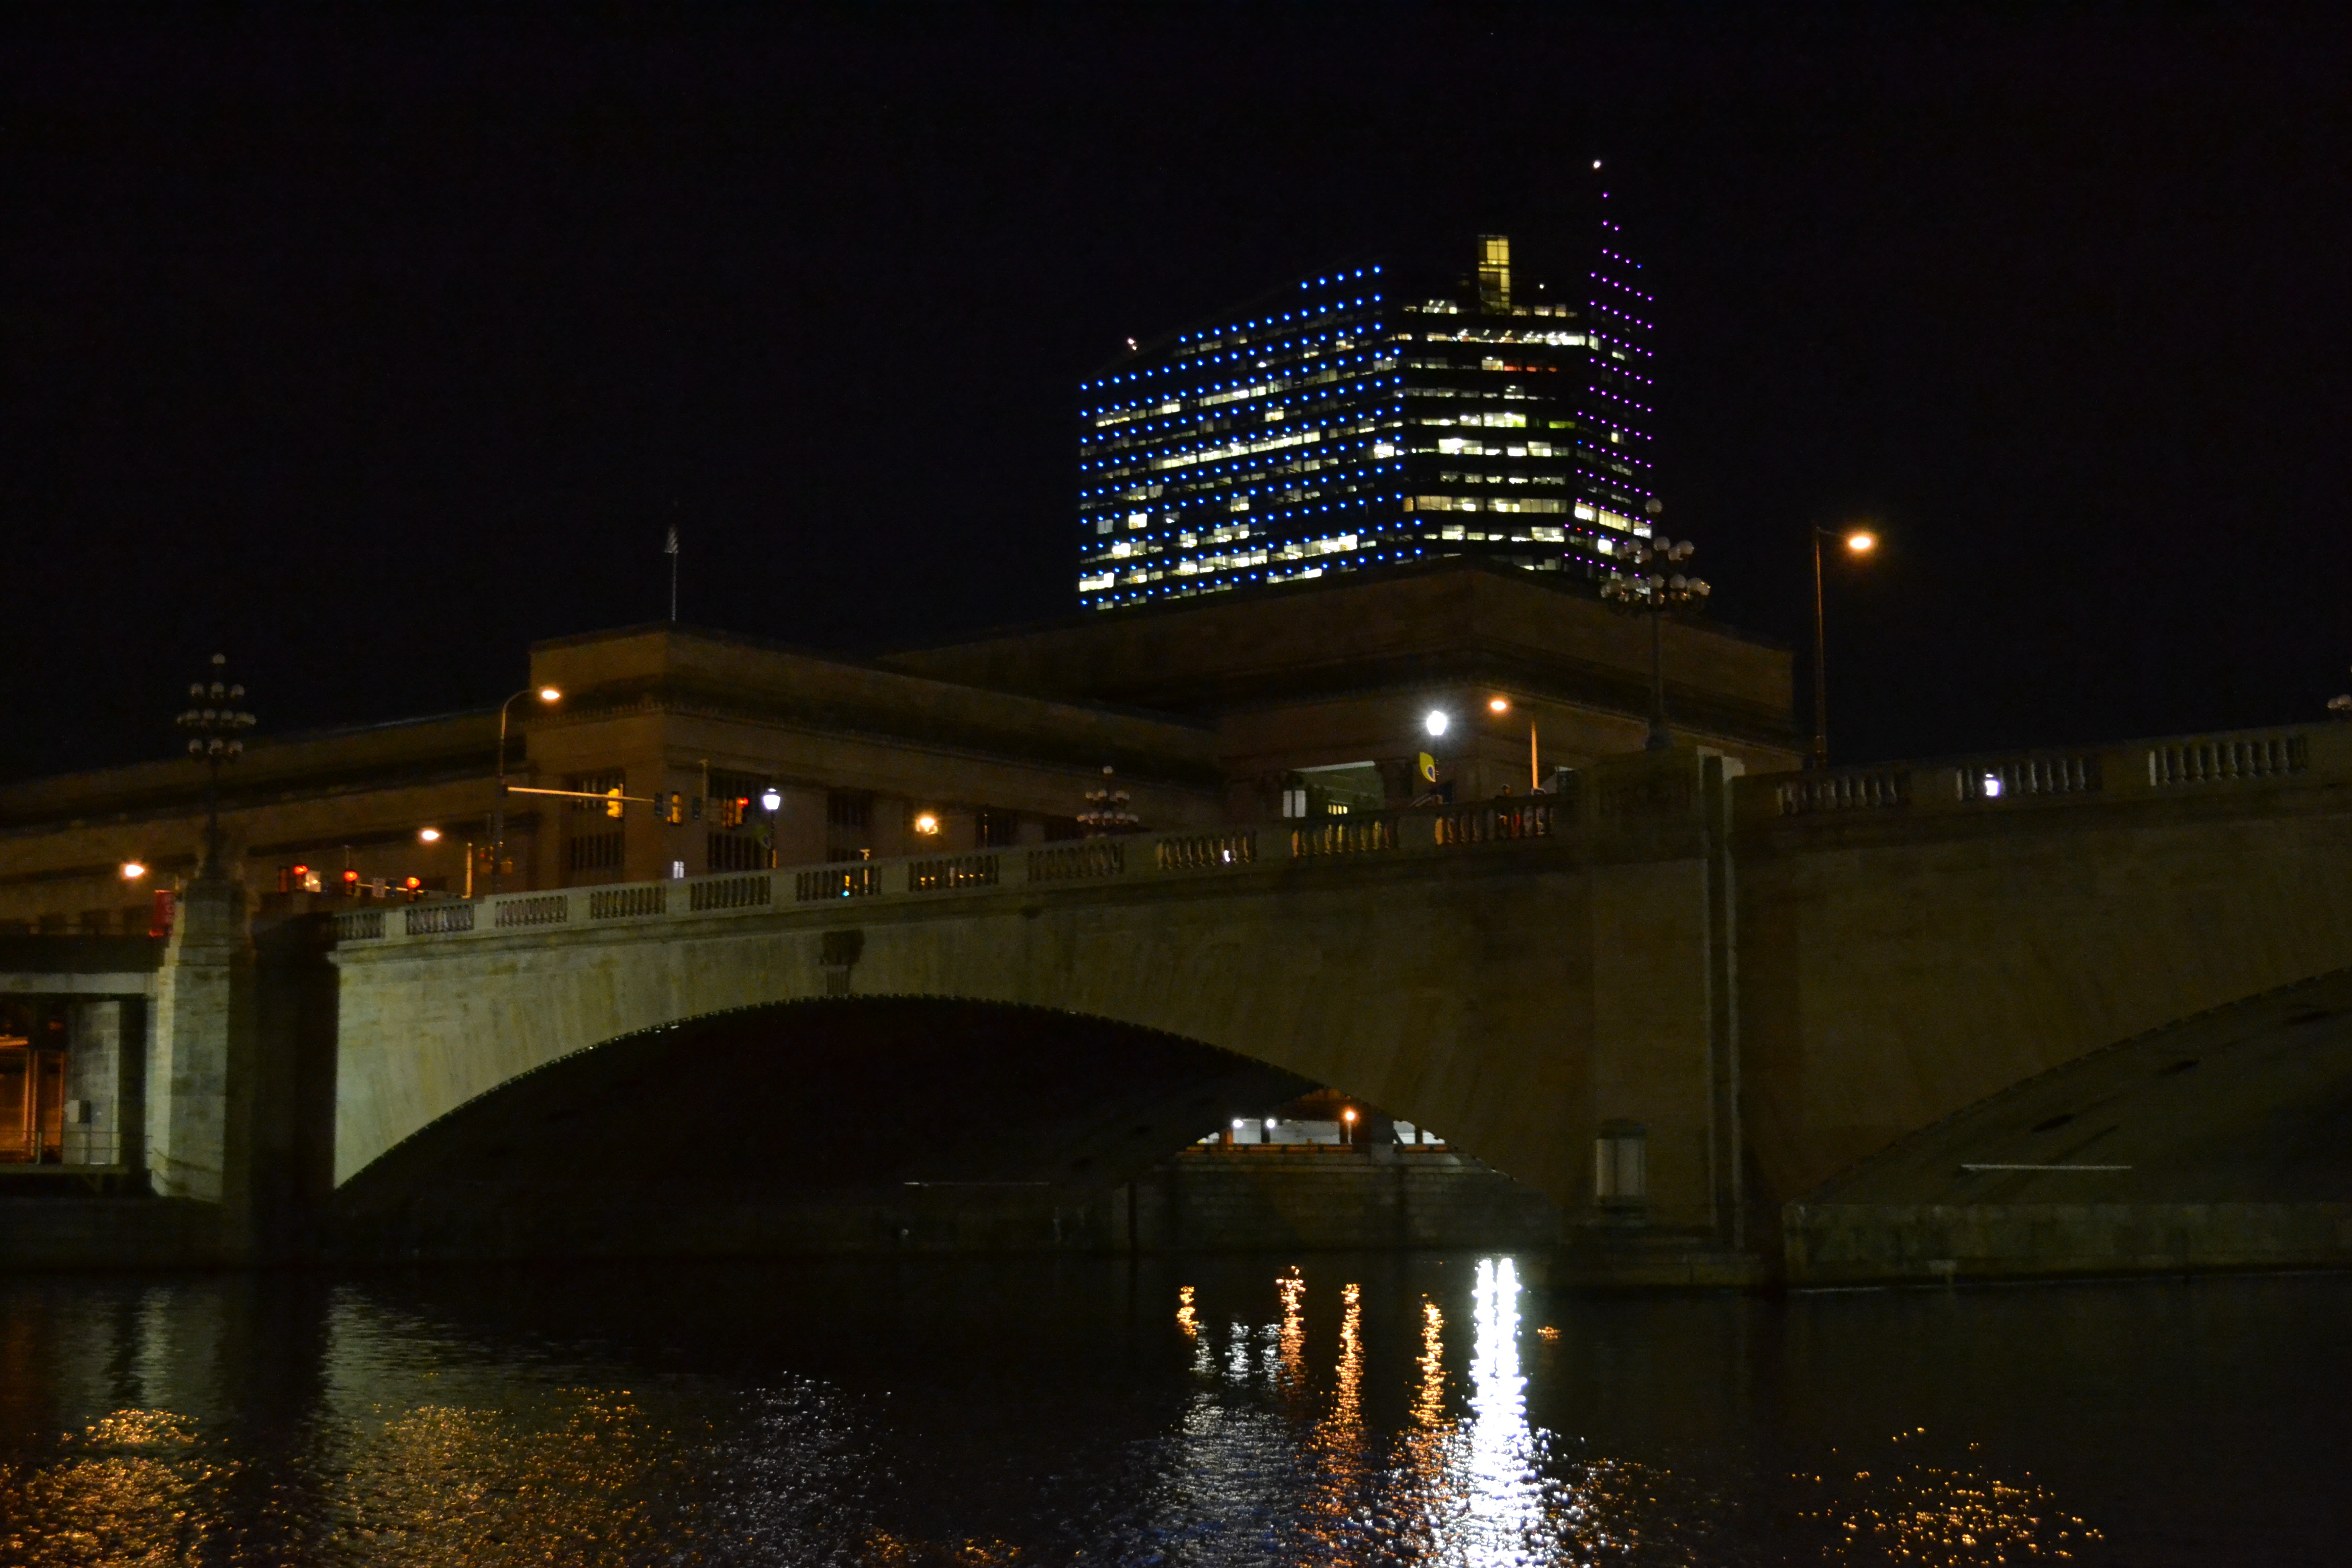 30th Street Bridge with 30th Street Station hidden in the background, pre-lighting